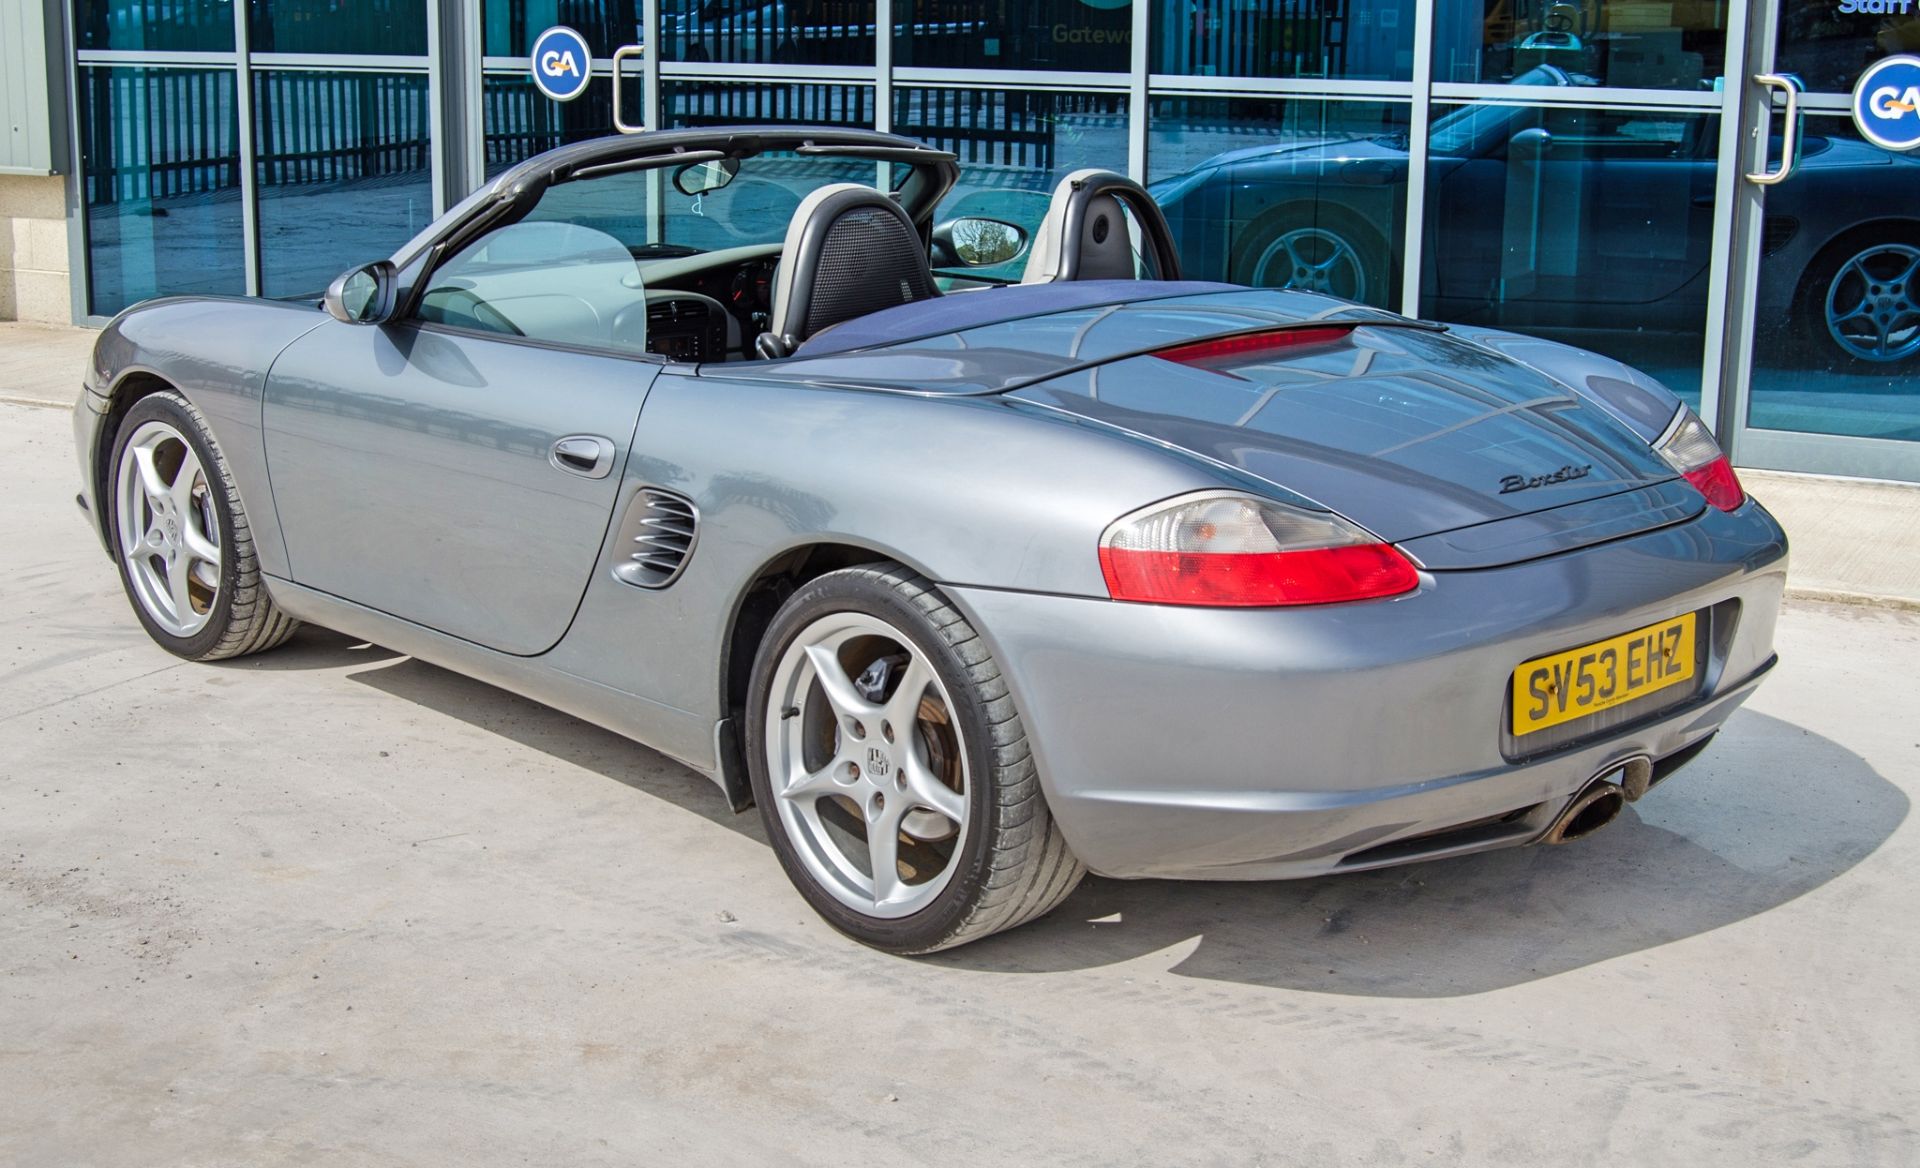 2003 Porsche Boxster 2.7 5 speed manual convertible roadster - Image 8 of 50